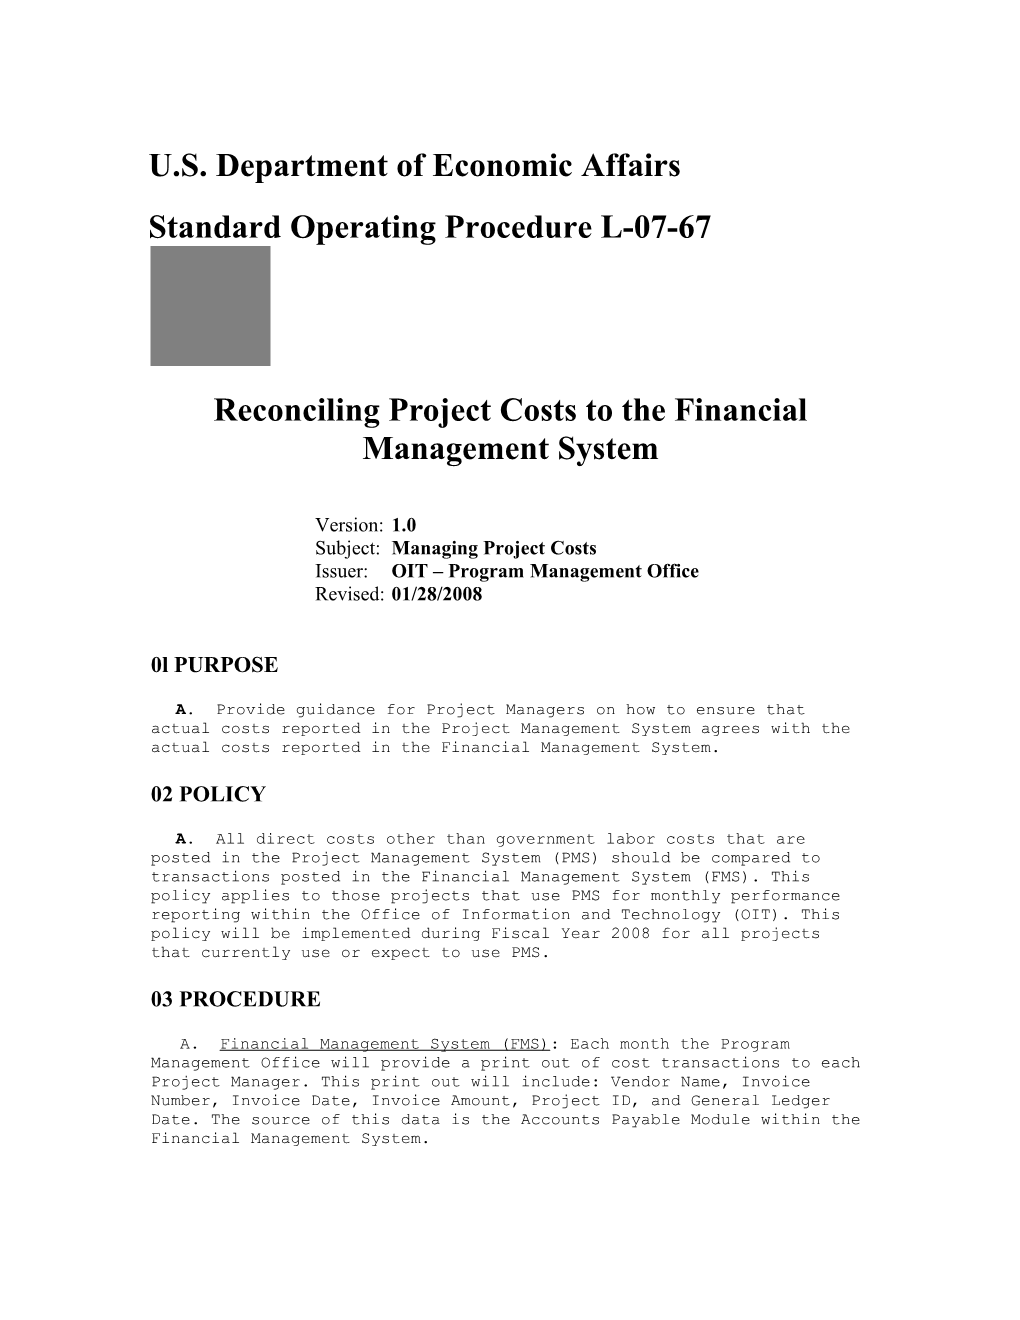 Reconciling Project Costs to the Financial Management System